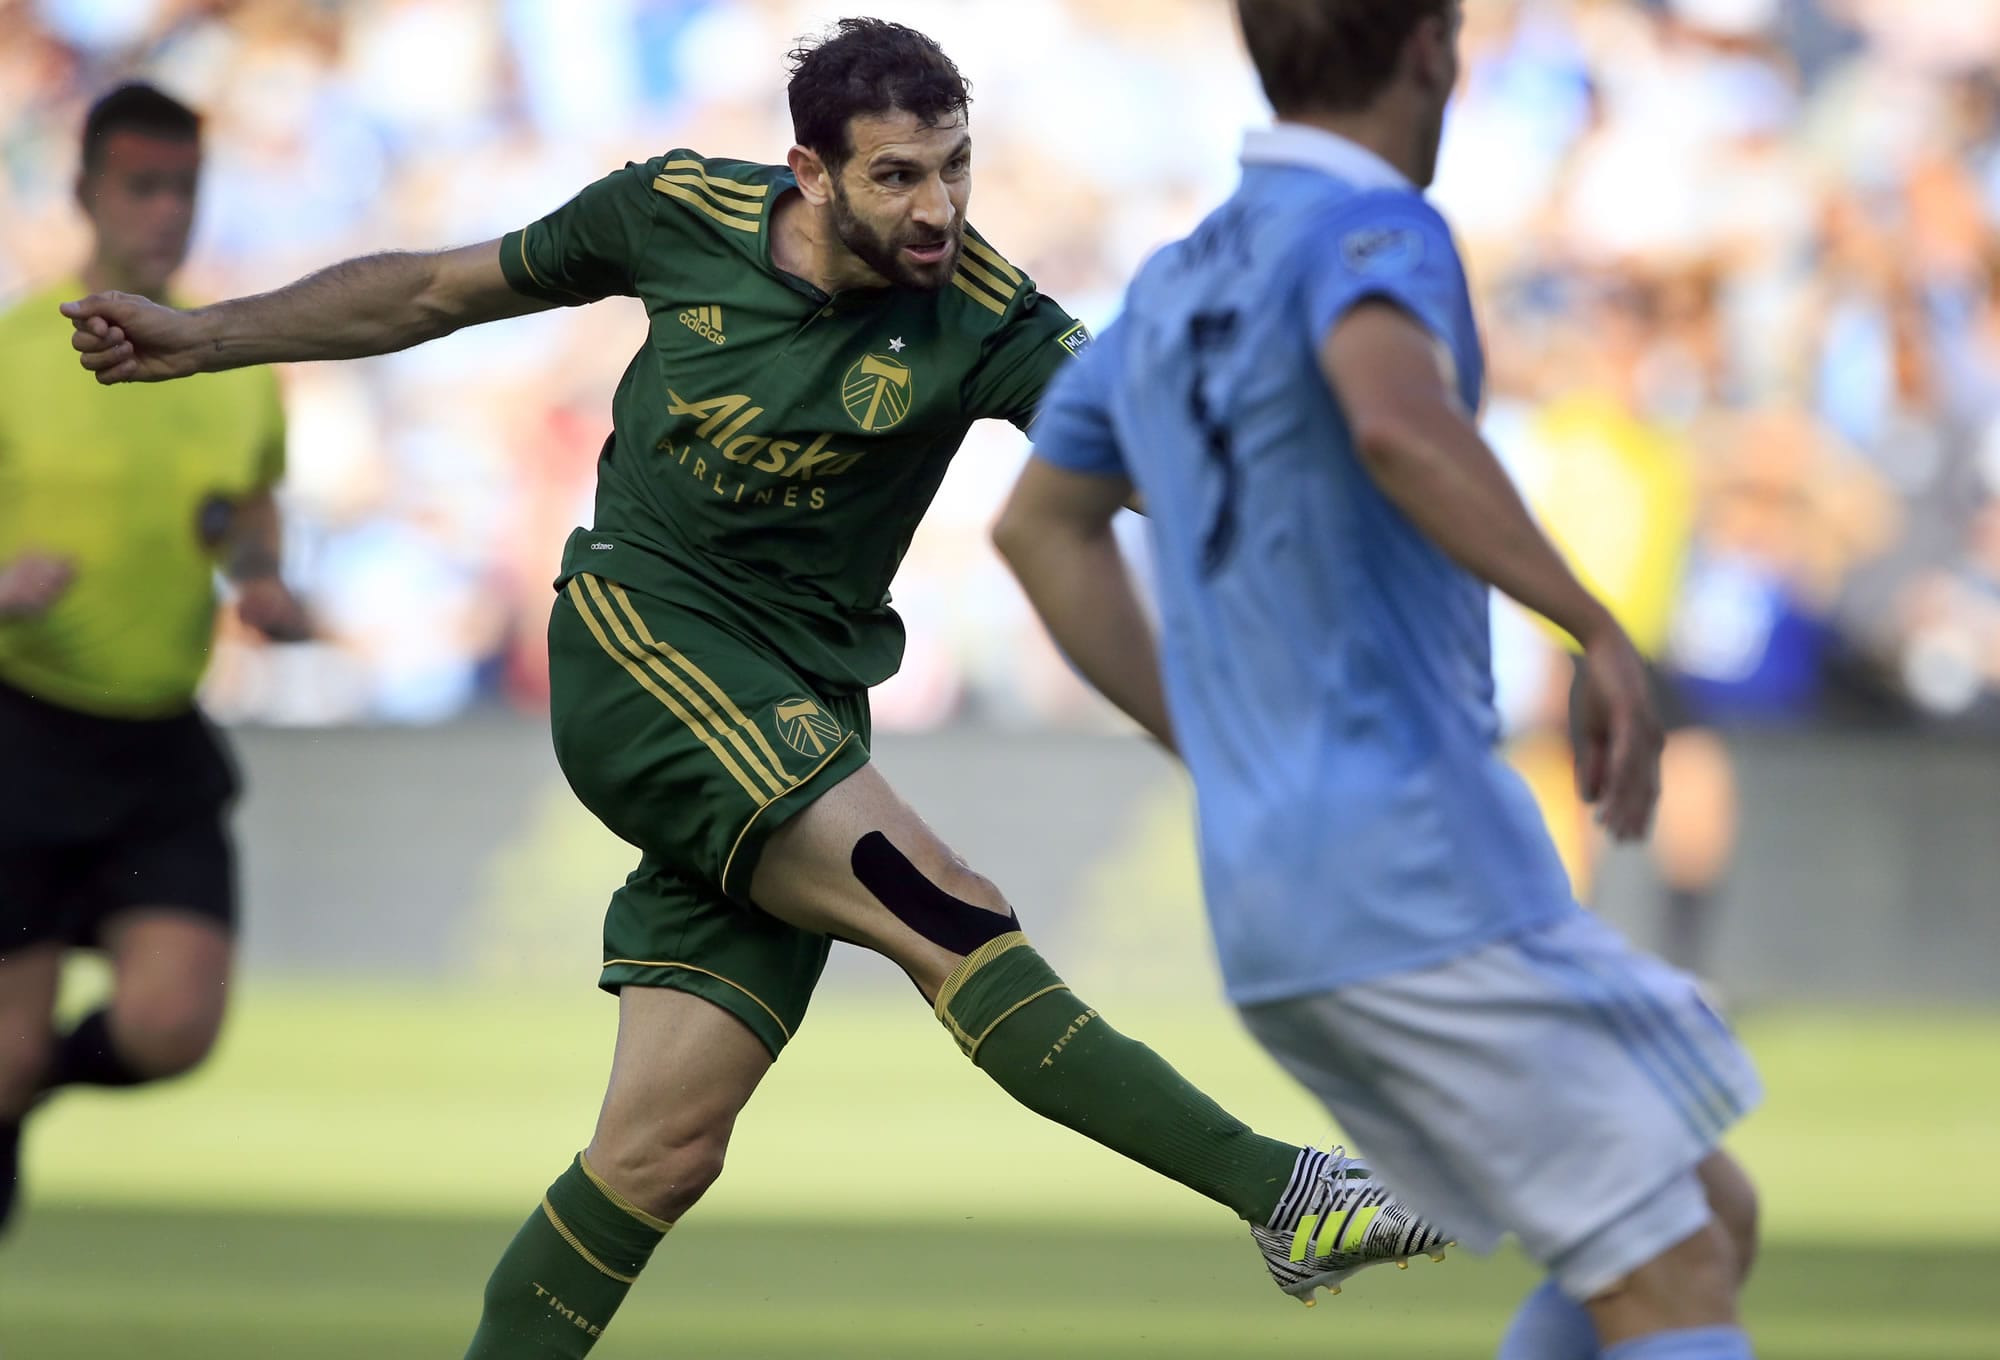 Portland Timbers midfielder Diego Valeri scores a goal during the first half of an MLS soccer match against Sporting Kansas City in Kansas City, Kan., Saturday, July 1, 2017.